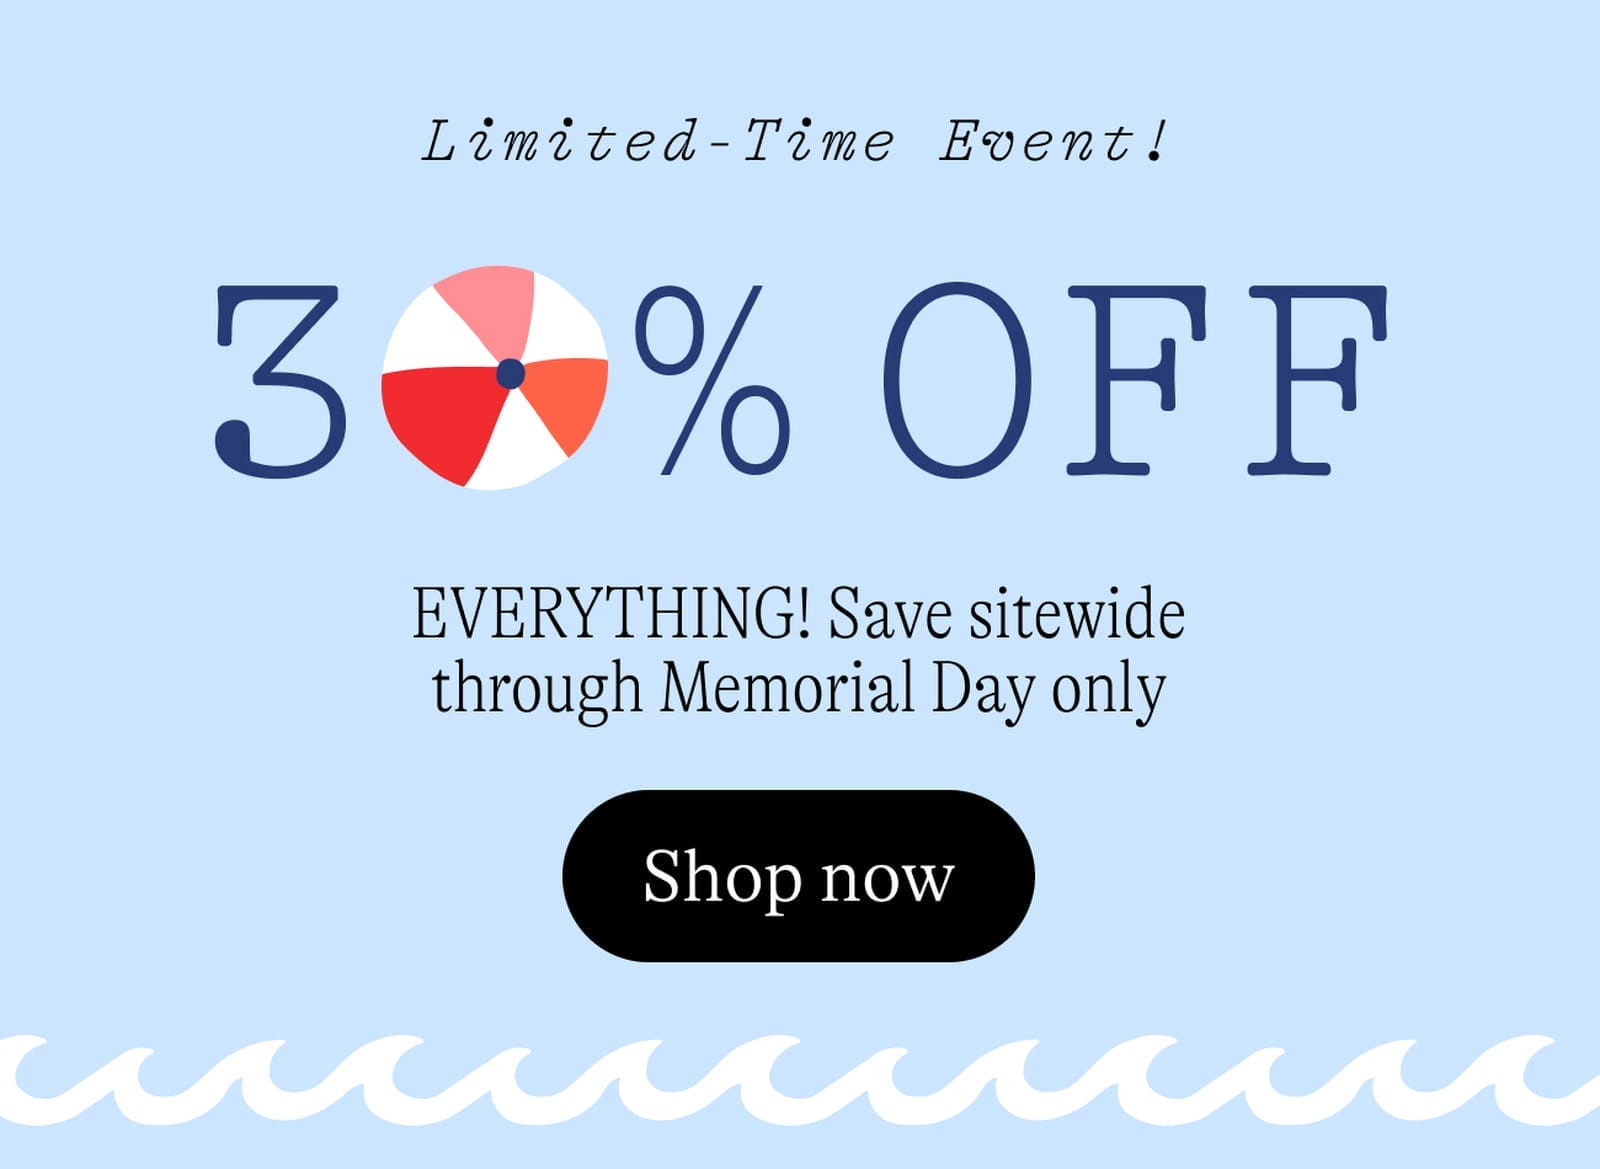 Limited-Time Event! 30% Off EVERYTHING! Save sitewide through Memorial Day only. Shop now